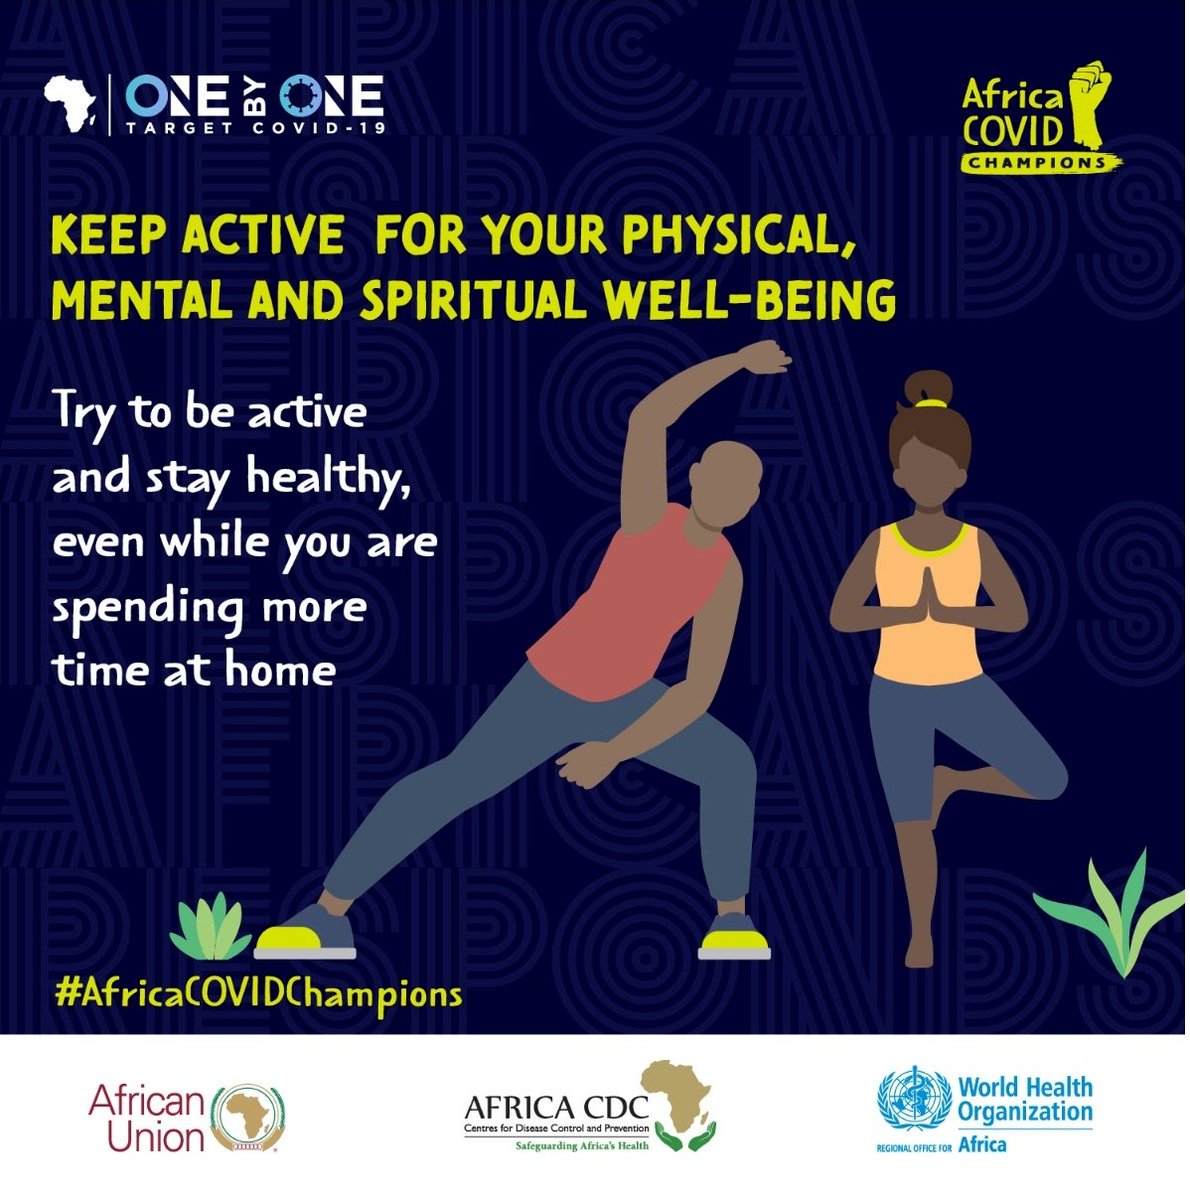 Regular exercise is very important 
#AfricaCOVIDChampions